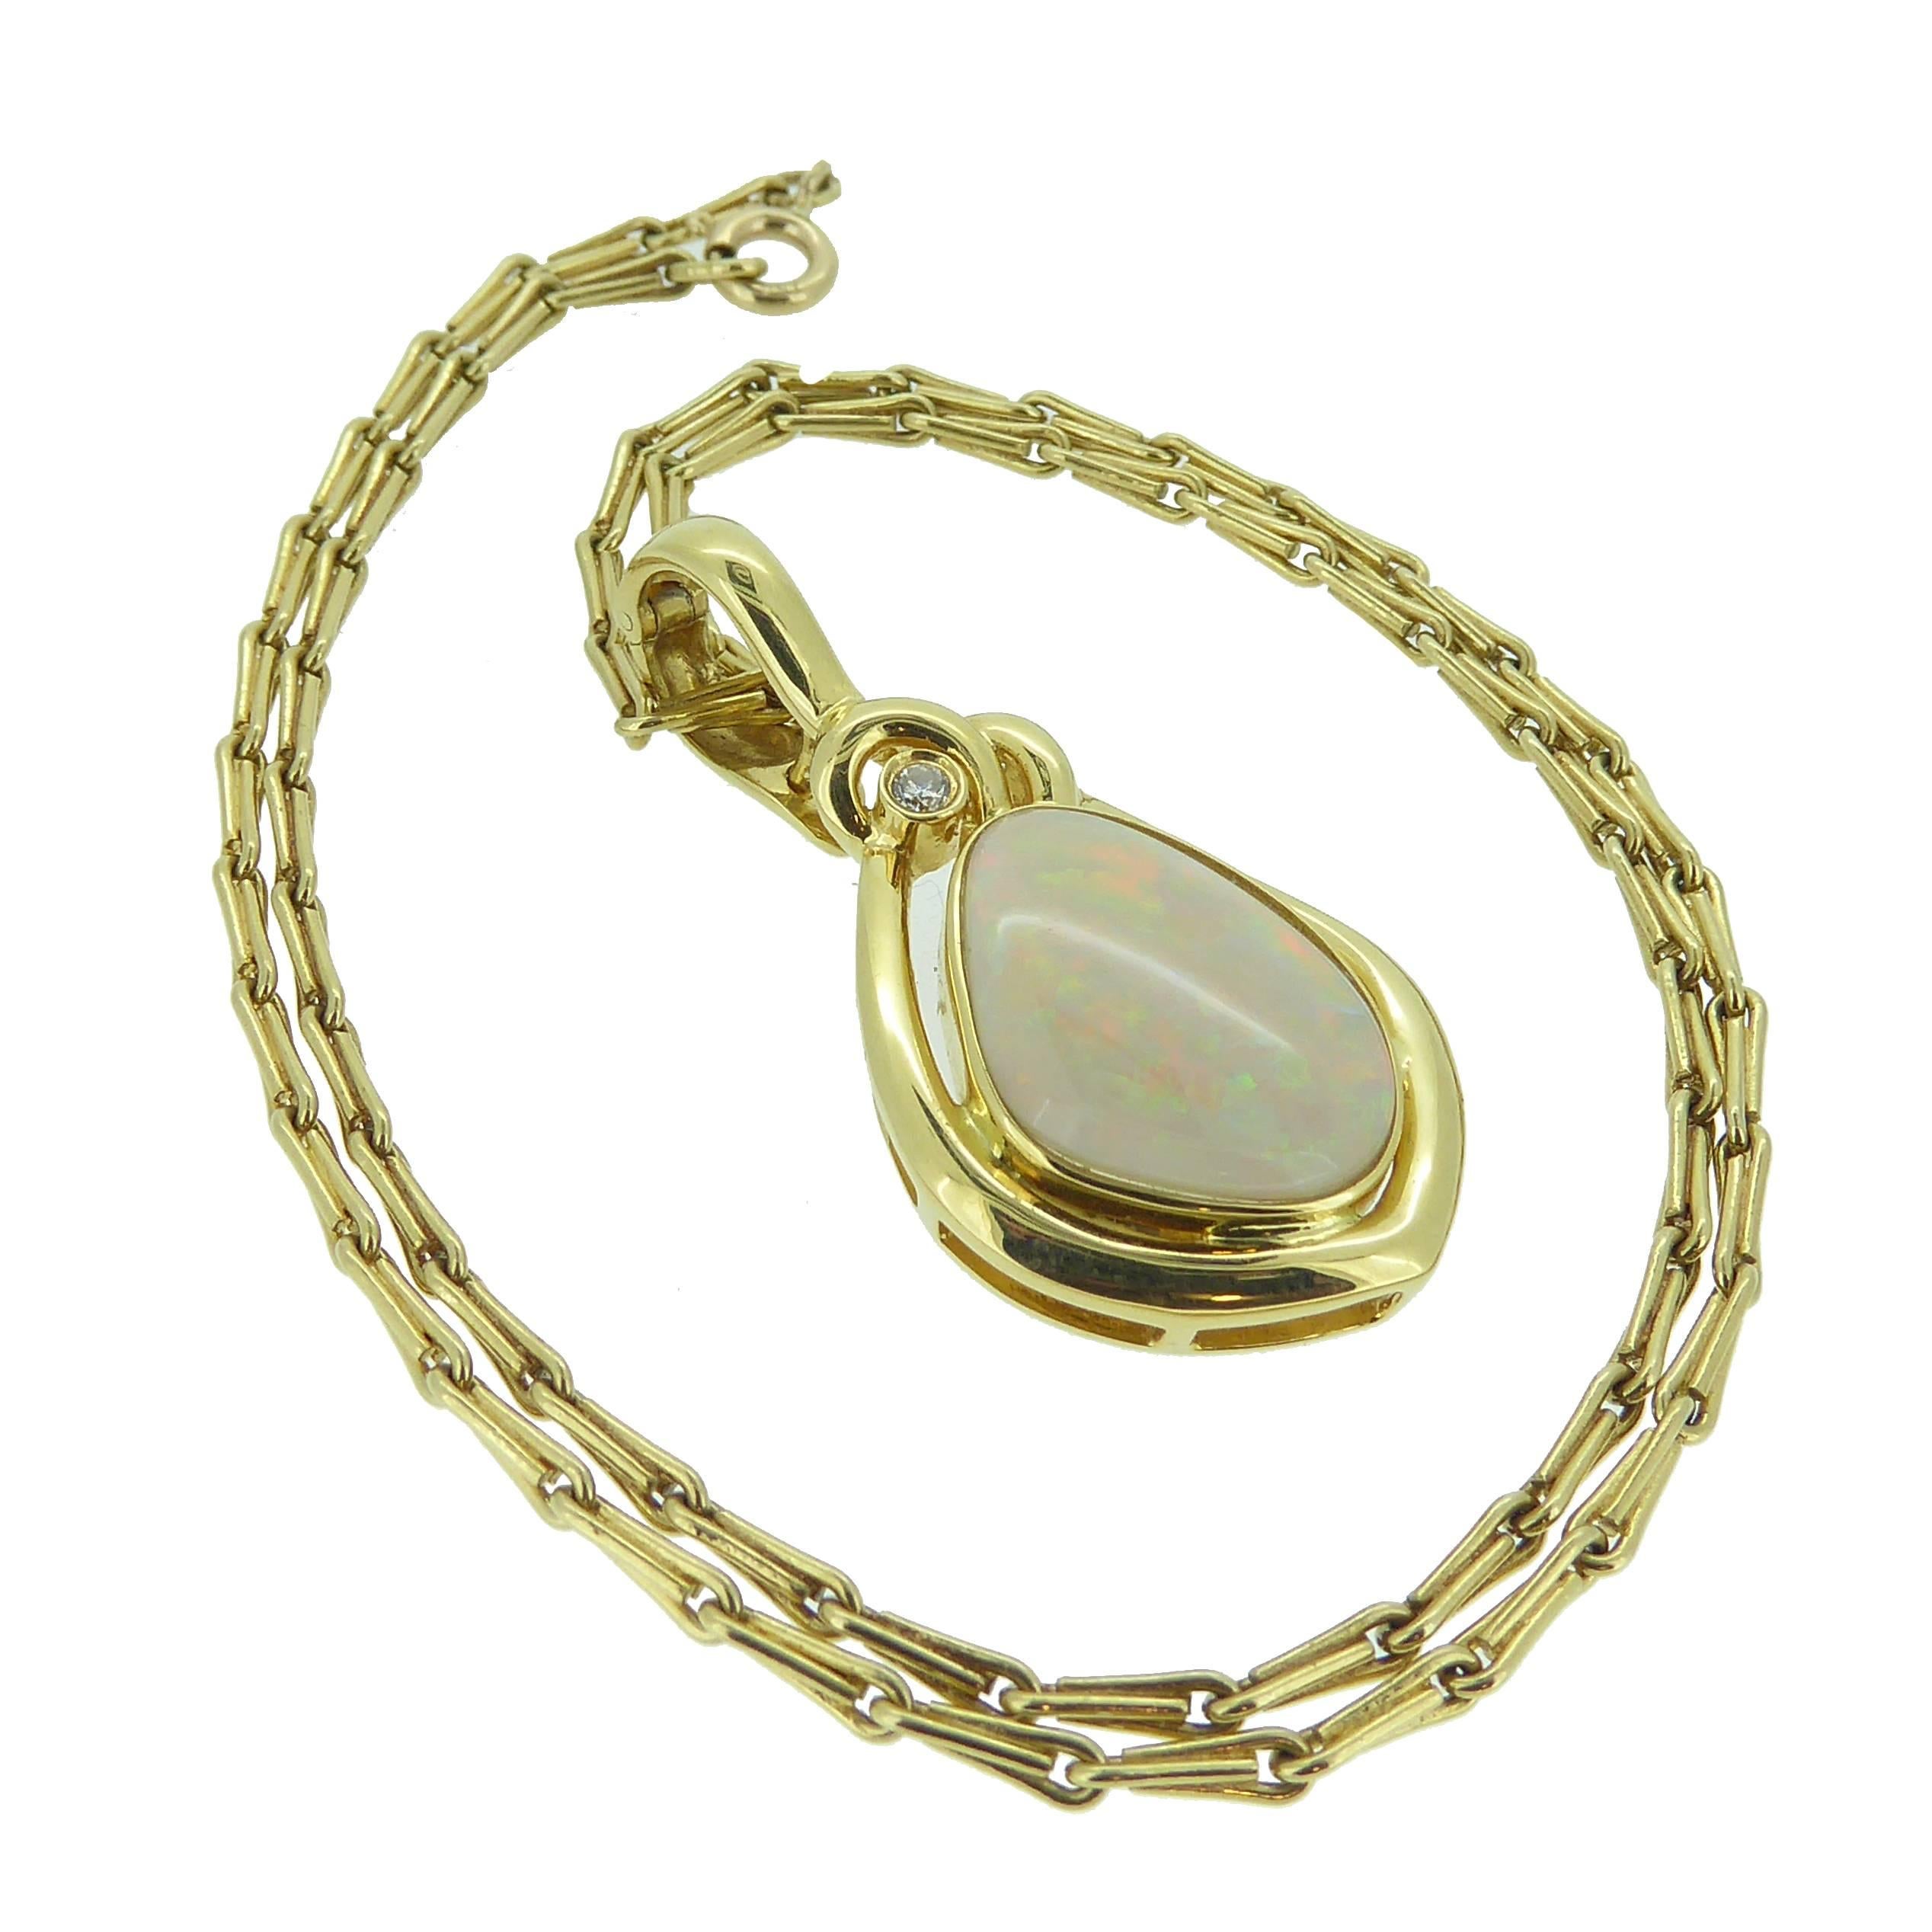 Something out of the ordinary with its off-oval shape and mirroring gold surround, this opal and diamond is set with a cabochon opal in a gold rub over setting compliments the rainbow hues of the of opal.  The single diamond feature at the top of